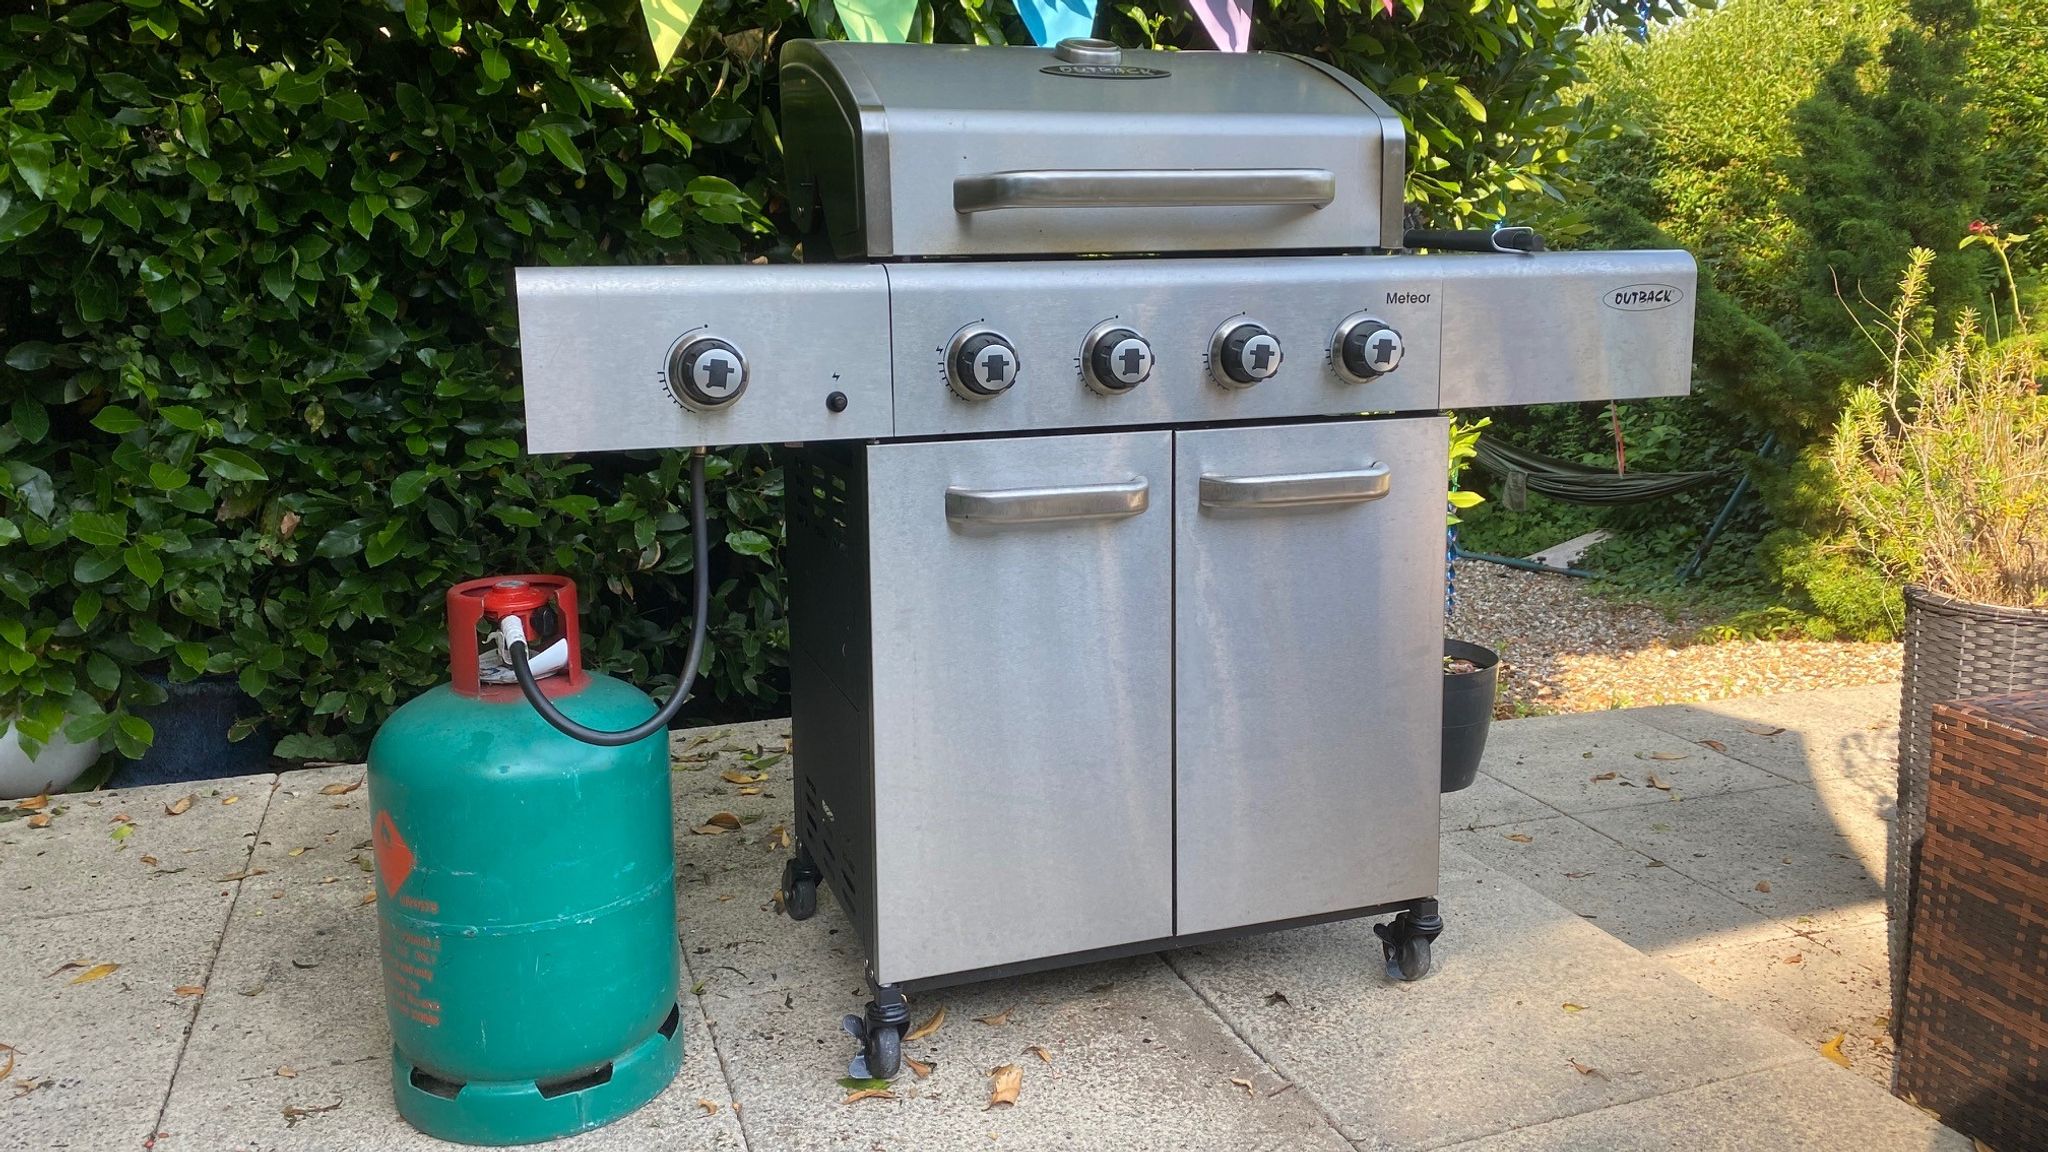 HOW TO MAKE BBQ GRILL FROM A EMPTY GAS CYLINDER